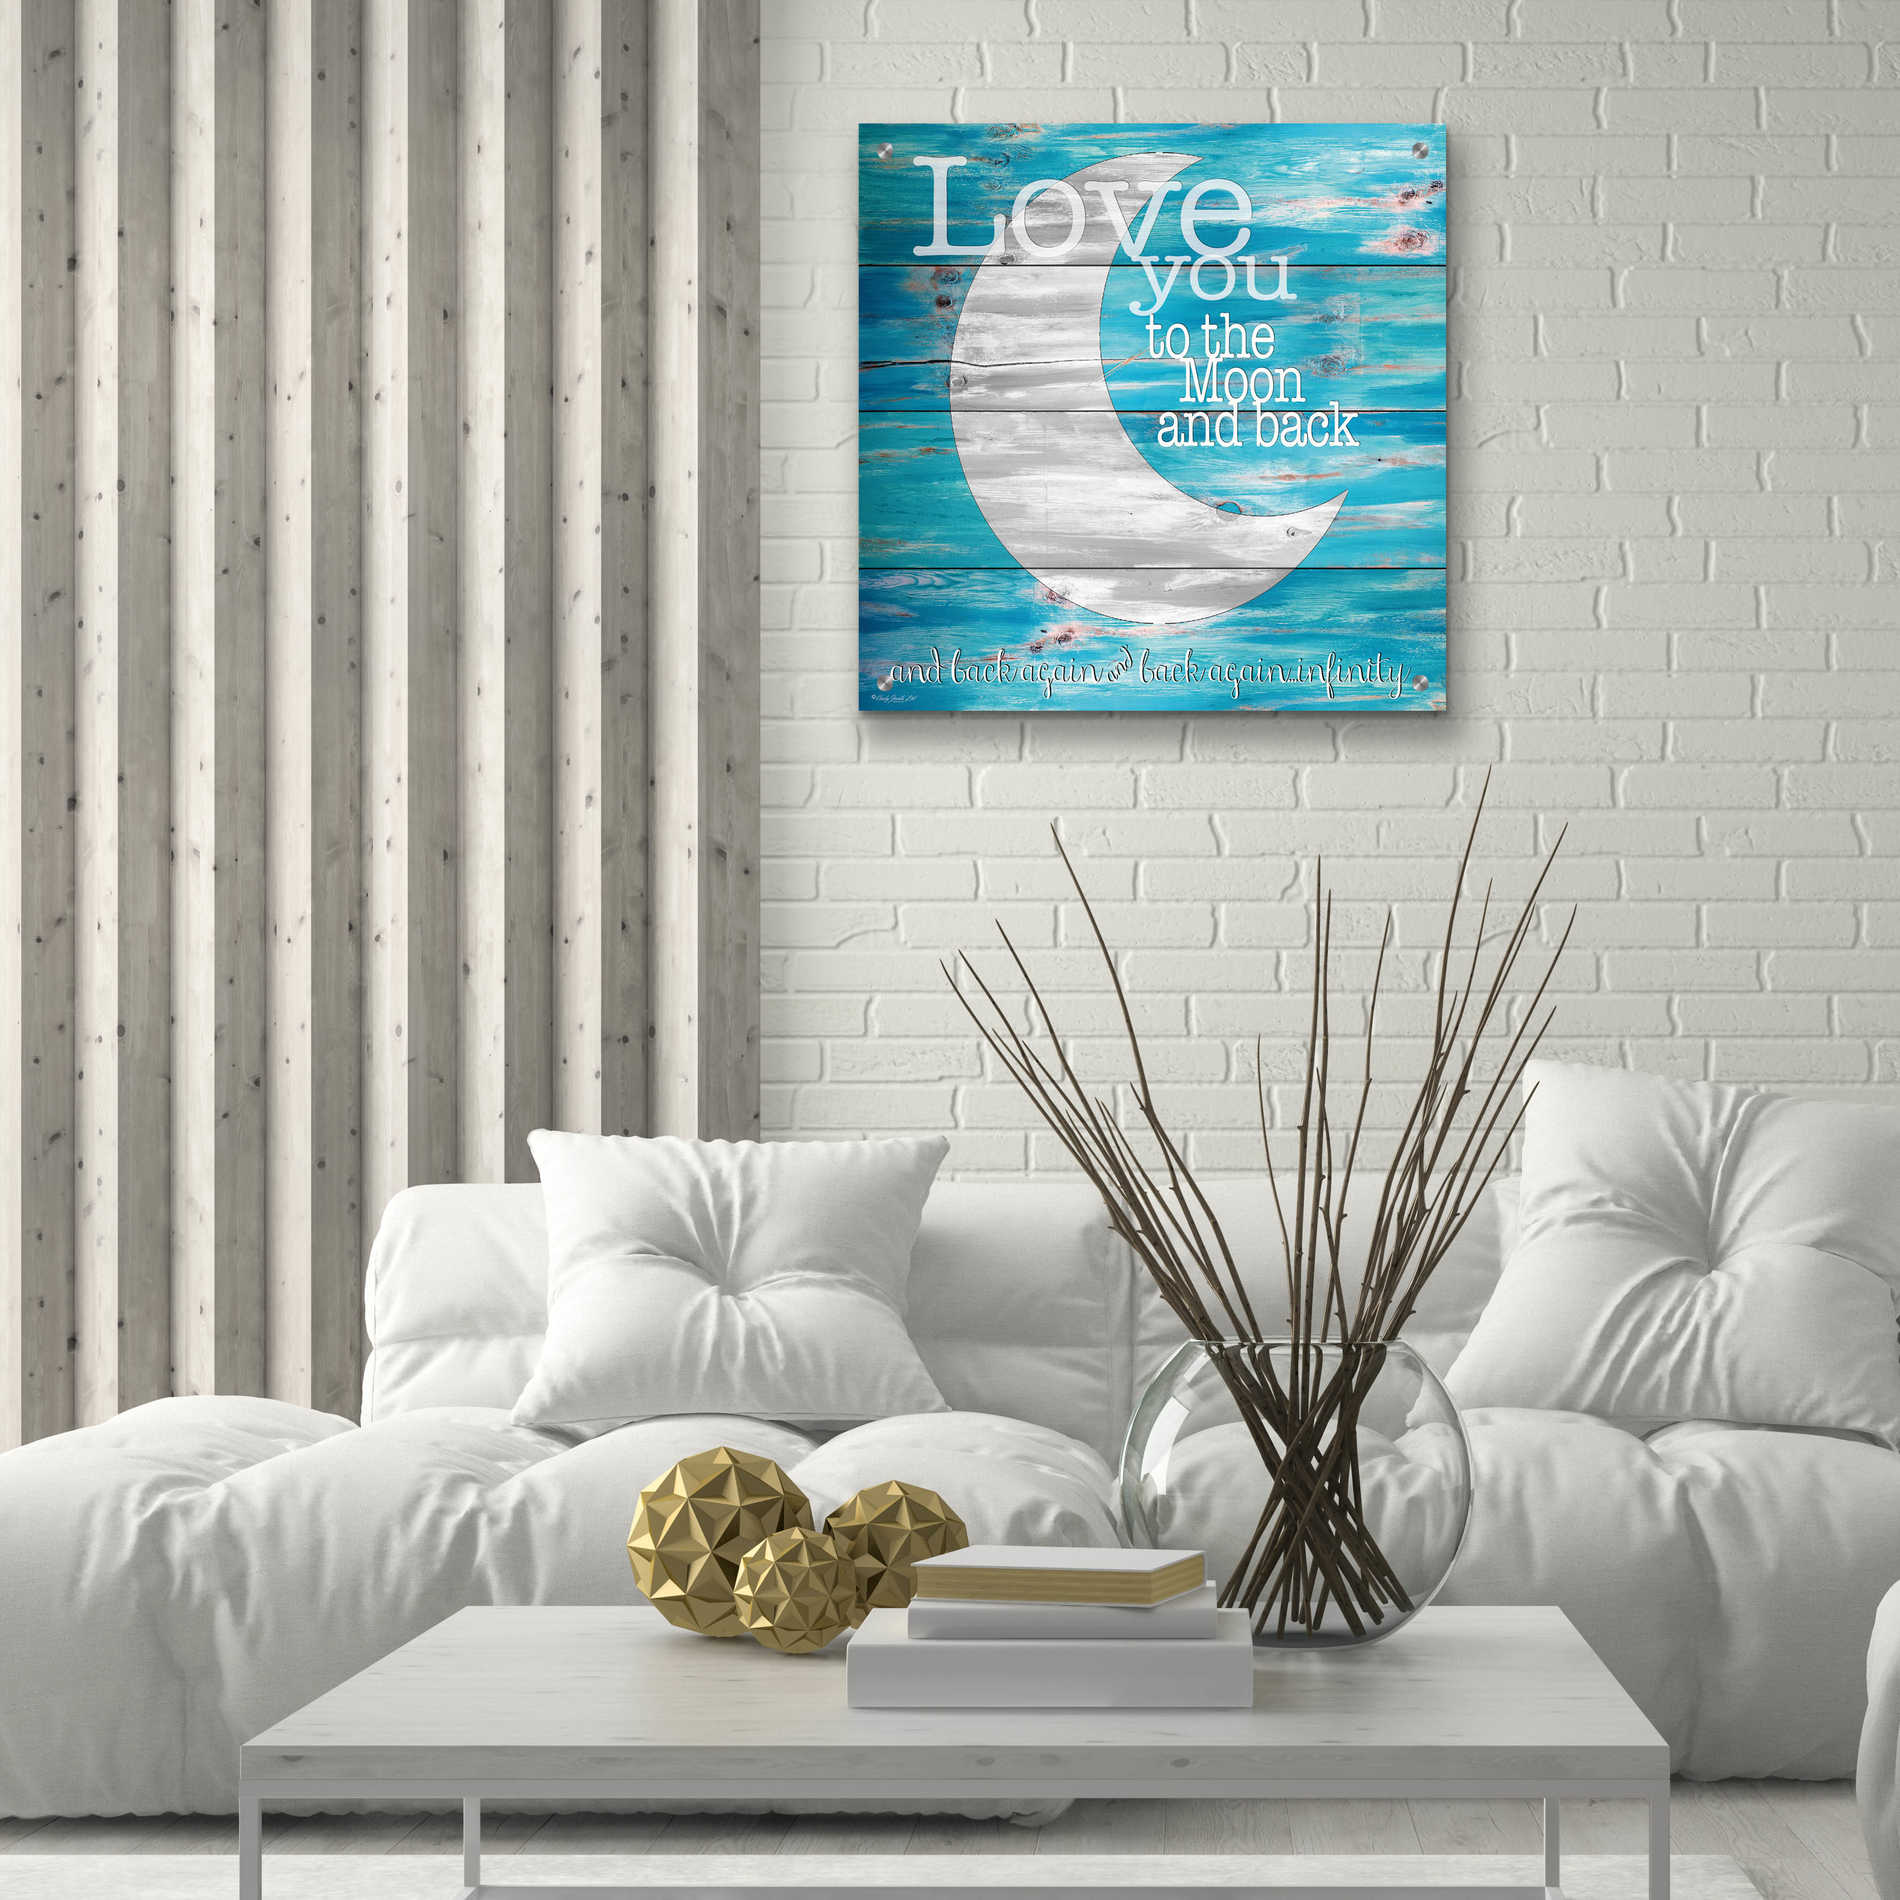 Epic Art 'Love You to the Moon and Back' by Cindy Jacobs, Acrylic Glass Wall Art,24x24